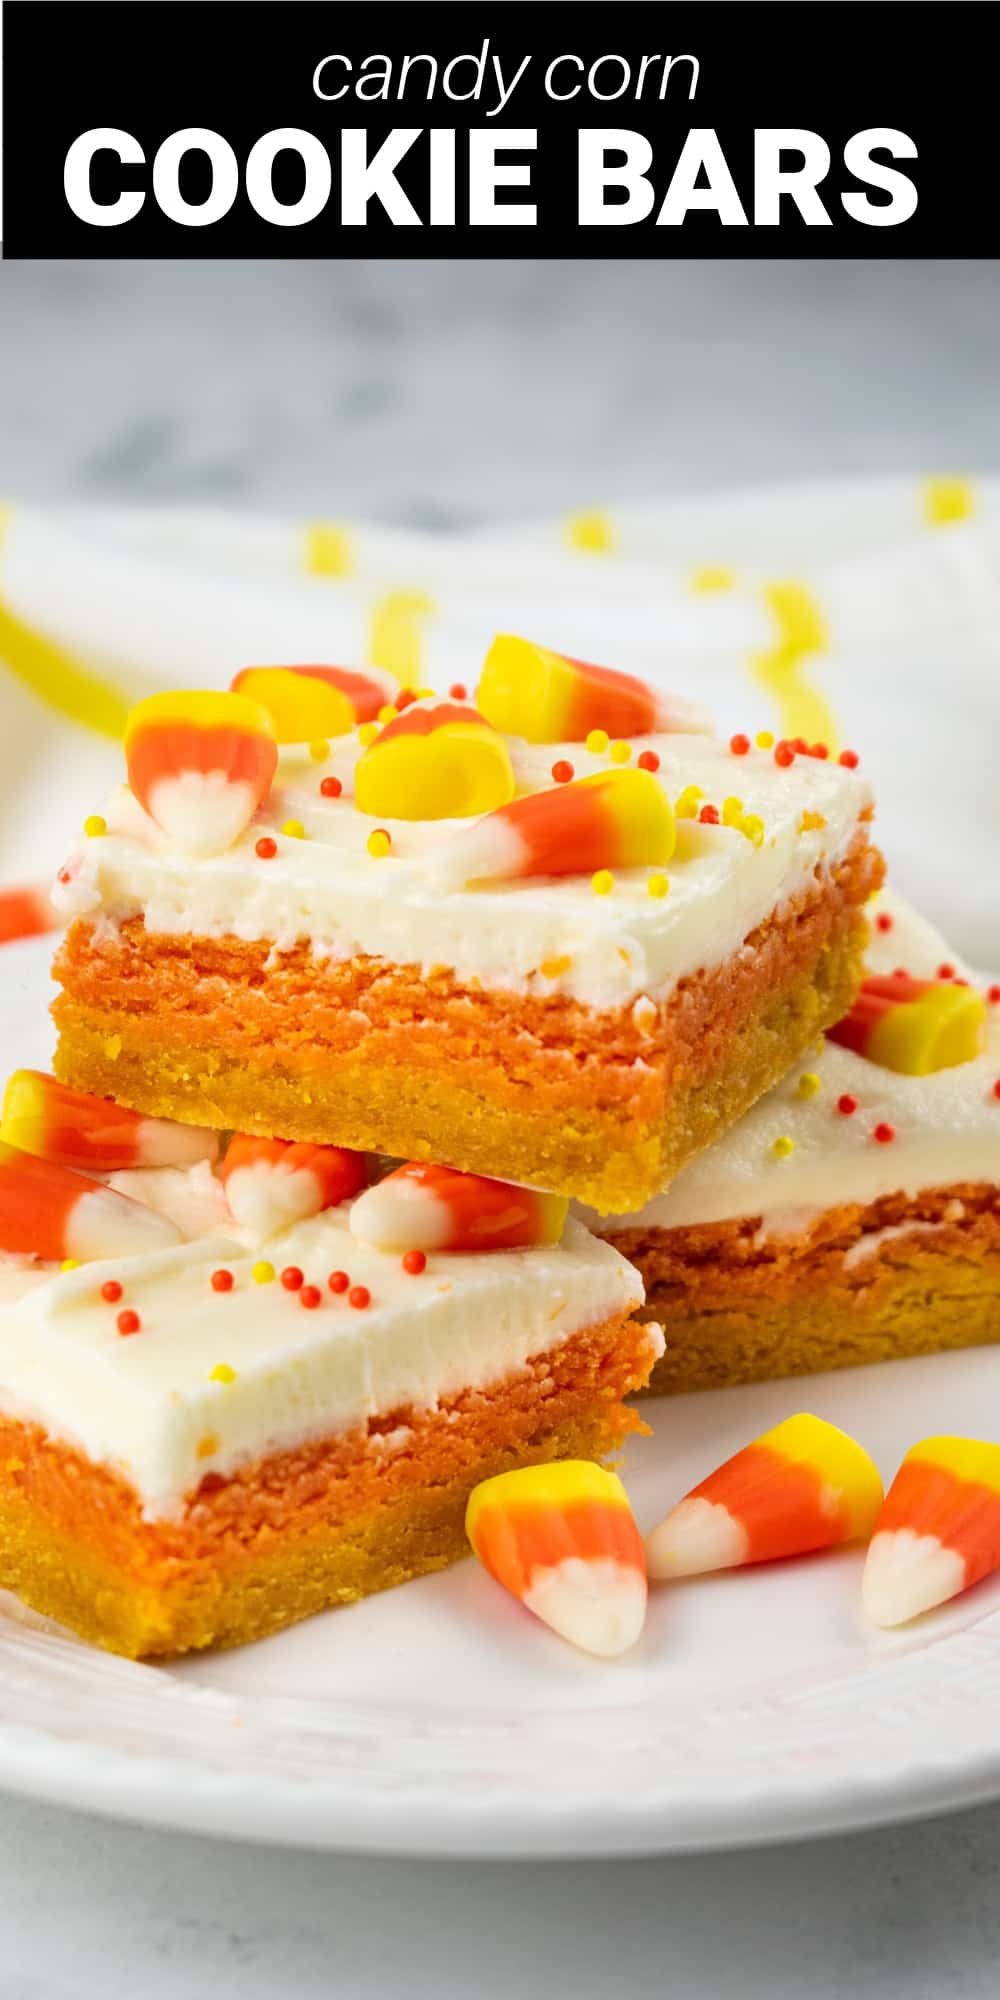 These candy corn cookie bars are a colorful and festive treat that deserves a top spot on your fall baking list. Layers of soft and chewy sugar cookie dough are topped with a creamy vanilla frosting and decorated with candy corn and sprinkles.